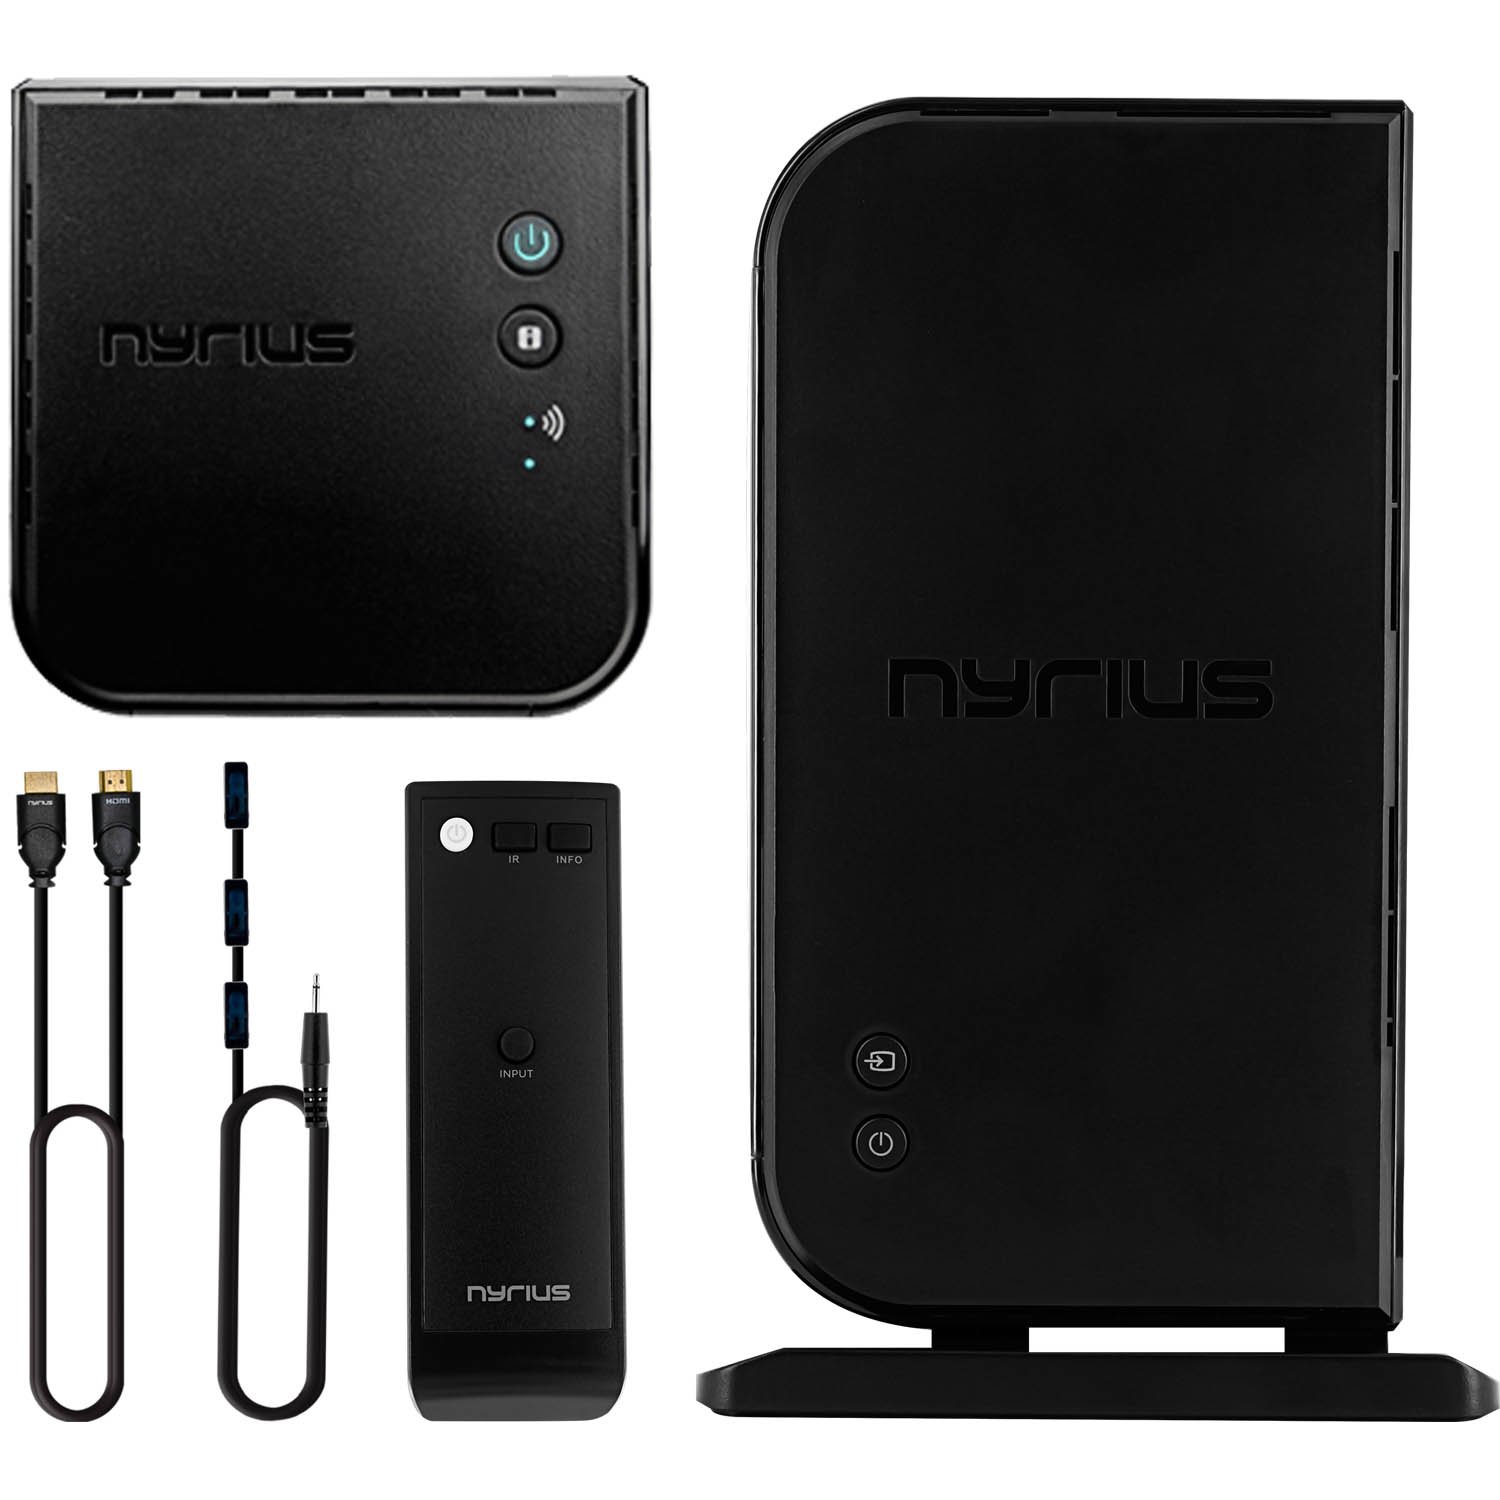 Nyrius Aries Home+ Wireless HDMI 2X Input Transmitter & Receiver for Streaming HD 1080p 3D Video and Digital Audio from Cable Box, Satellite, Bluray, DVD, PS4, PS3, Laptops, PC - 2 Pack